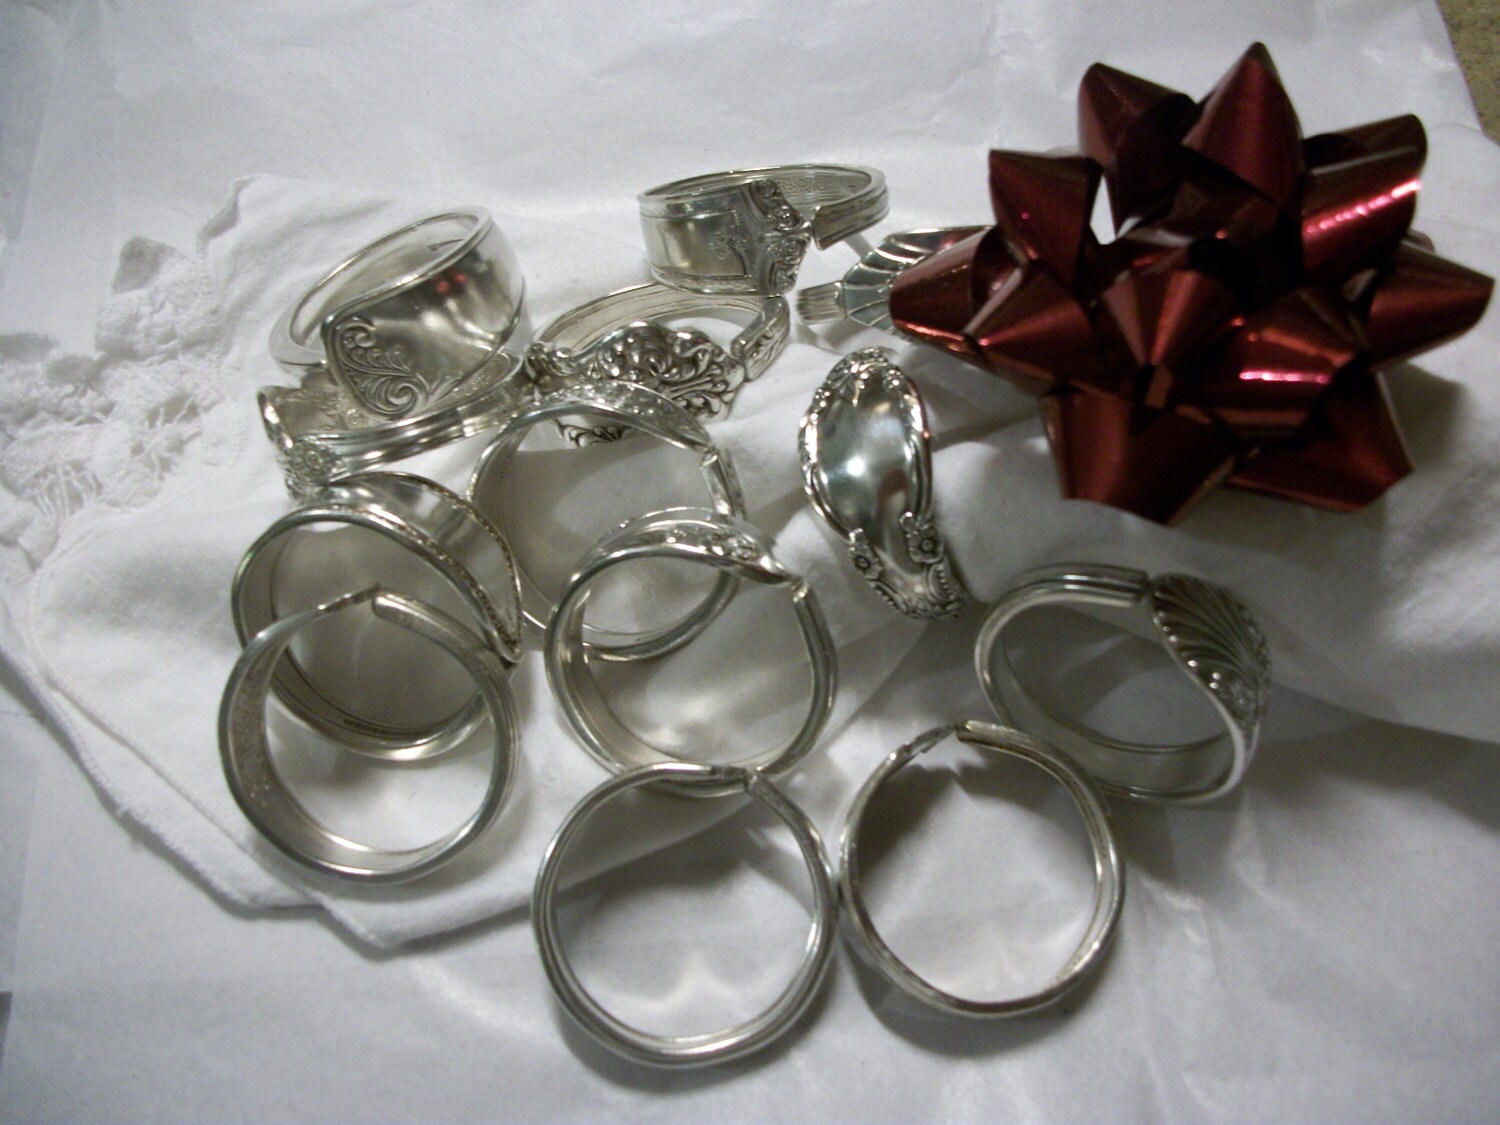 Assorted napkin rings handcrafted from antique by islandriches